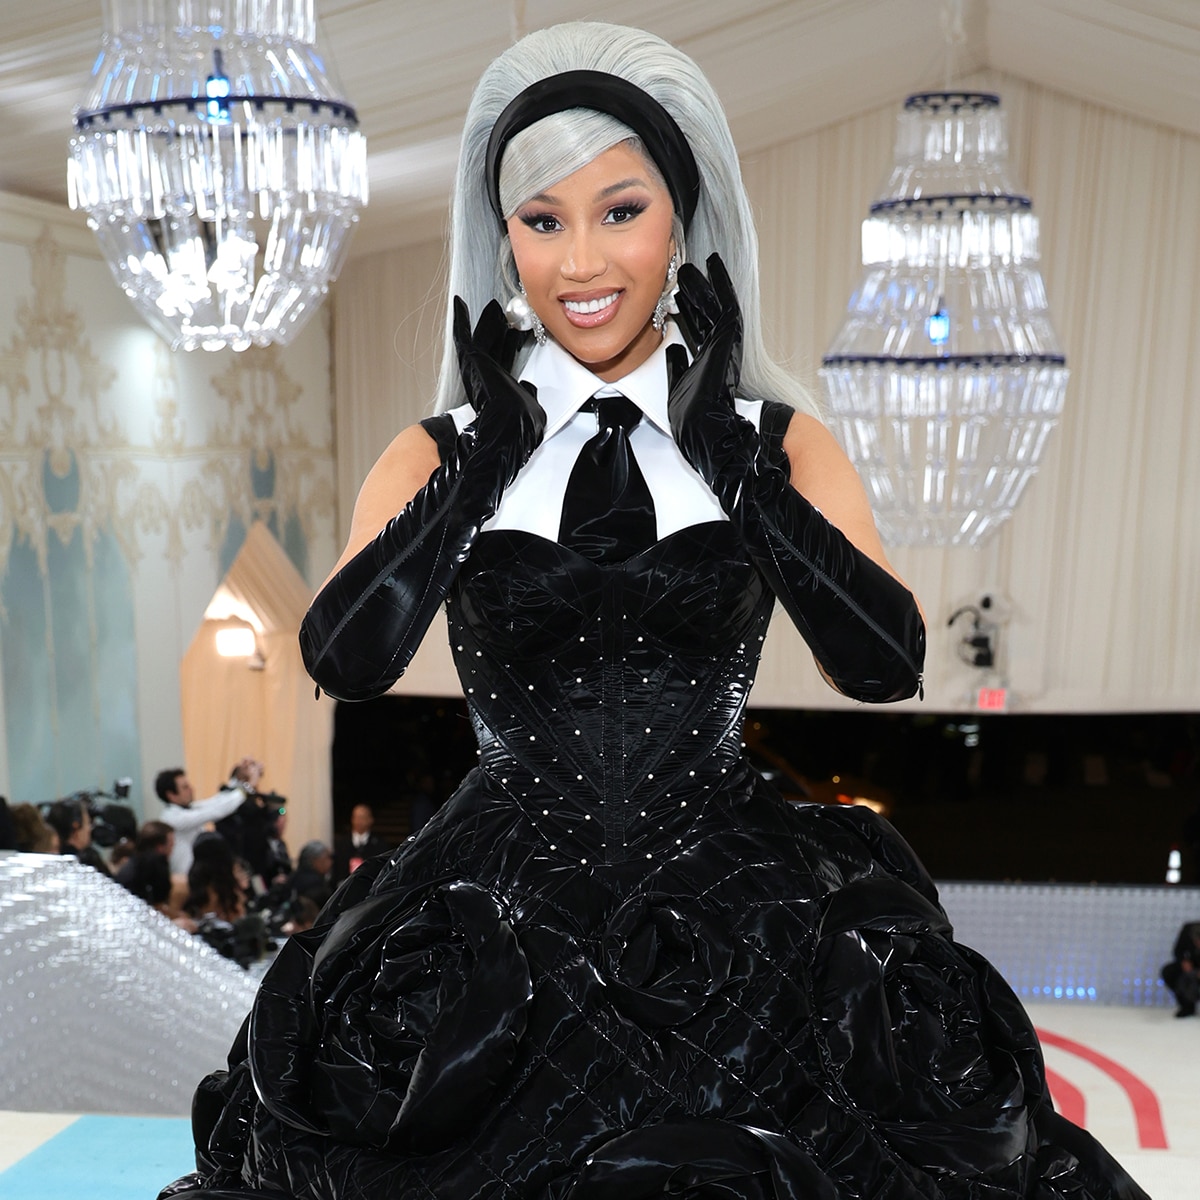 Met Gala: Cardi B Makes an Outfit Change From Hotel to Red Carpet ...